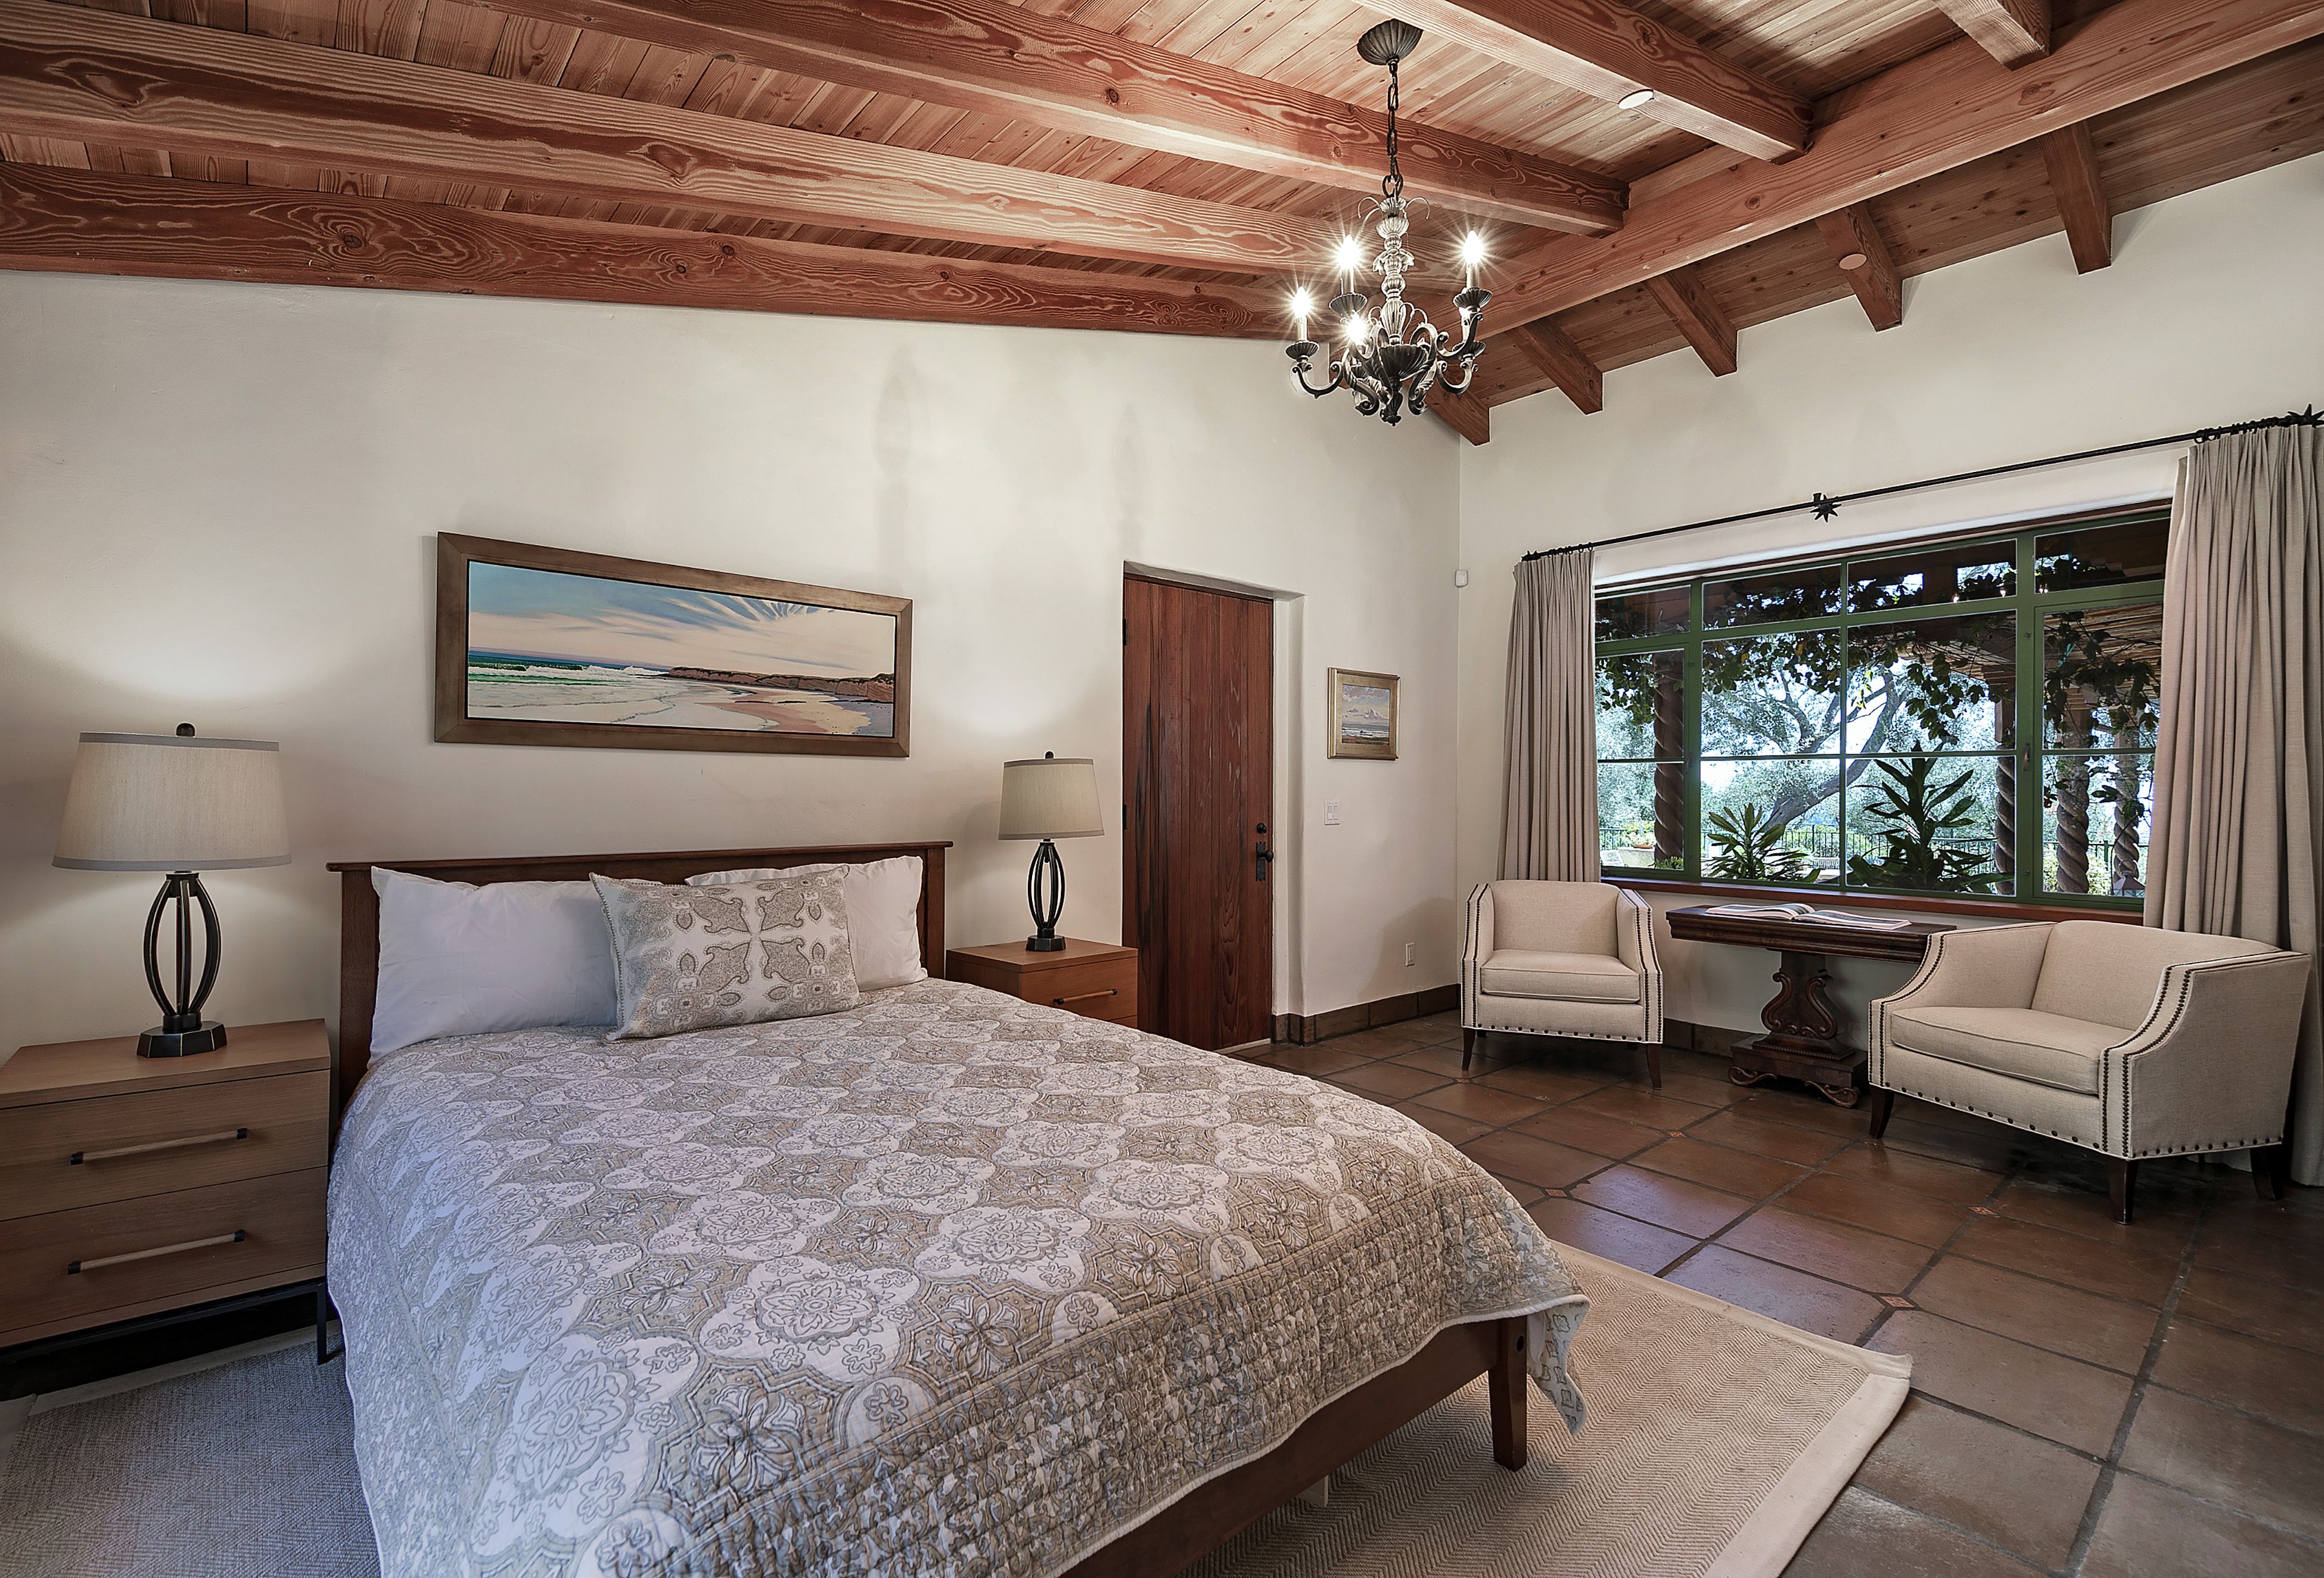 Furnished bedroom with open-beam ceiling, and large window with view of vine-covered pergola and trees